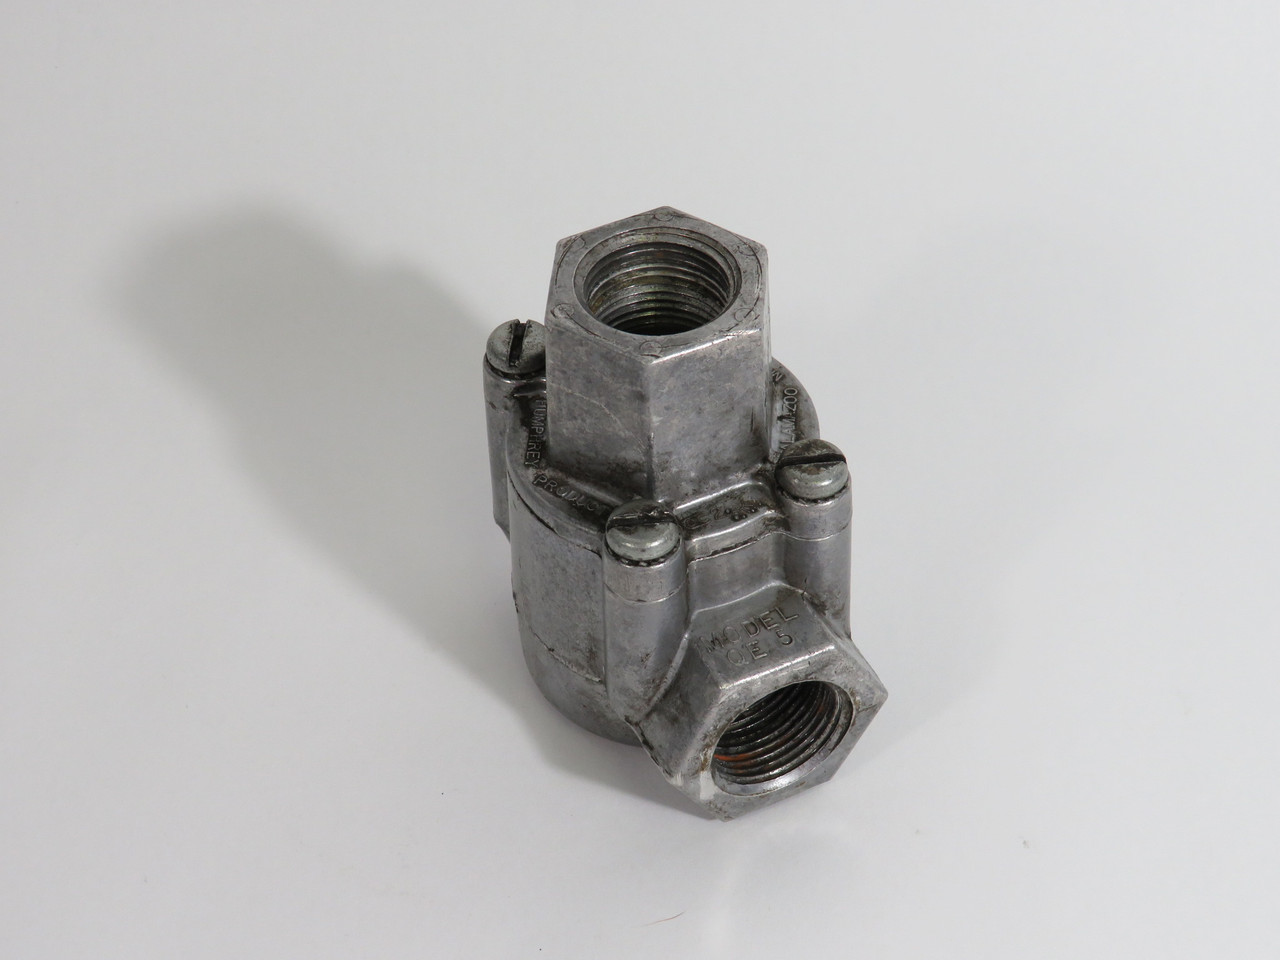 Humphrey QE5 Quick Exhaust Valve 3/4" Exhaust Port 3 Ports COSMETIC DAMAGE USED